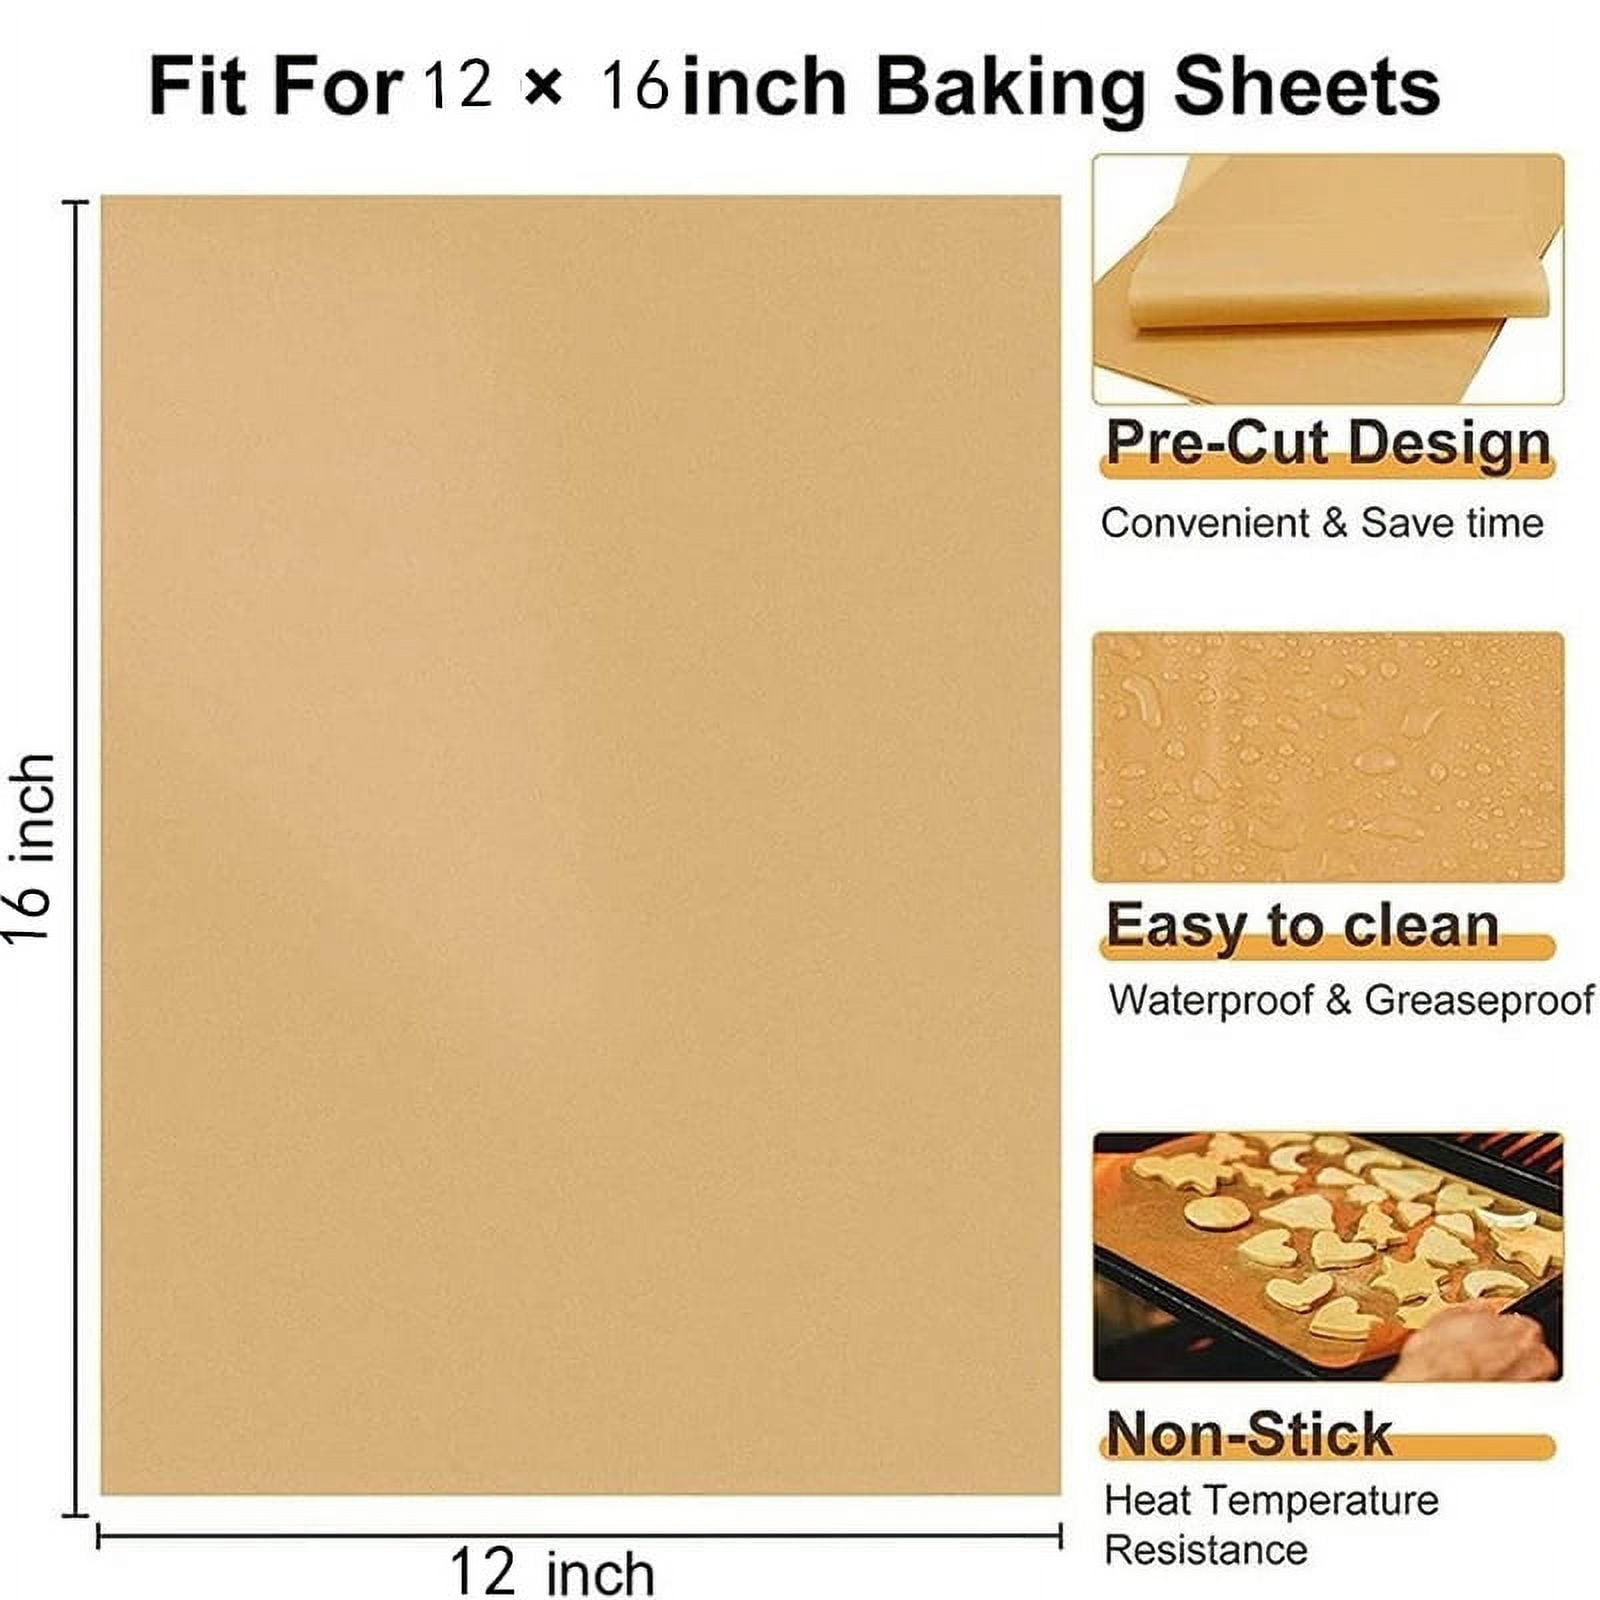 Kitchenatics Unbleached Non Stick Parchment Paper, Half-Sheet, Non-Perforated Cooking Sheet Liners for Baking Pan, Air Fryer, Steamer, Oven or Grill